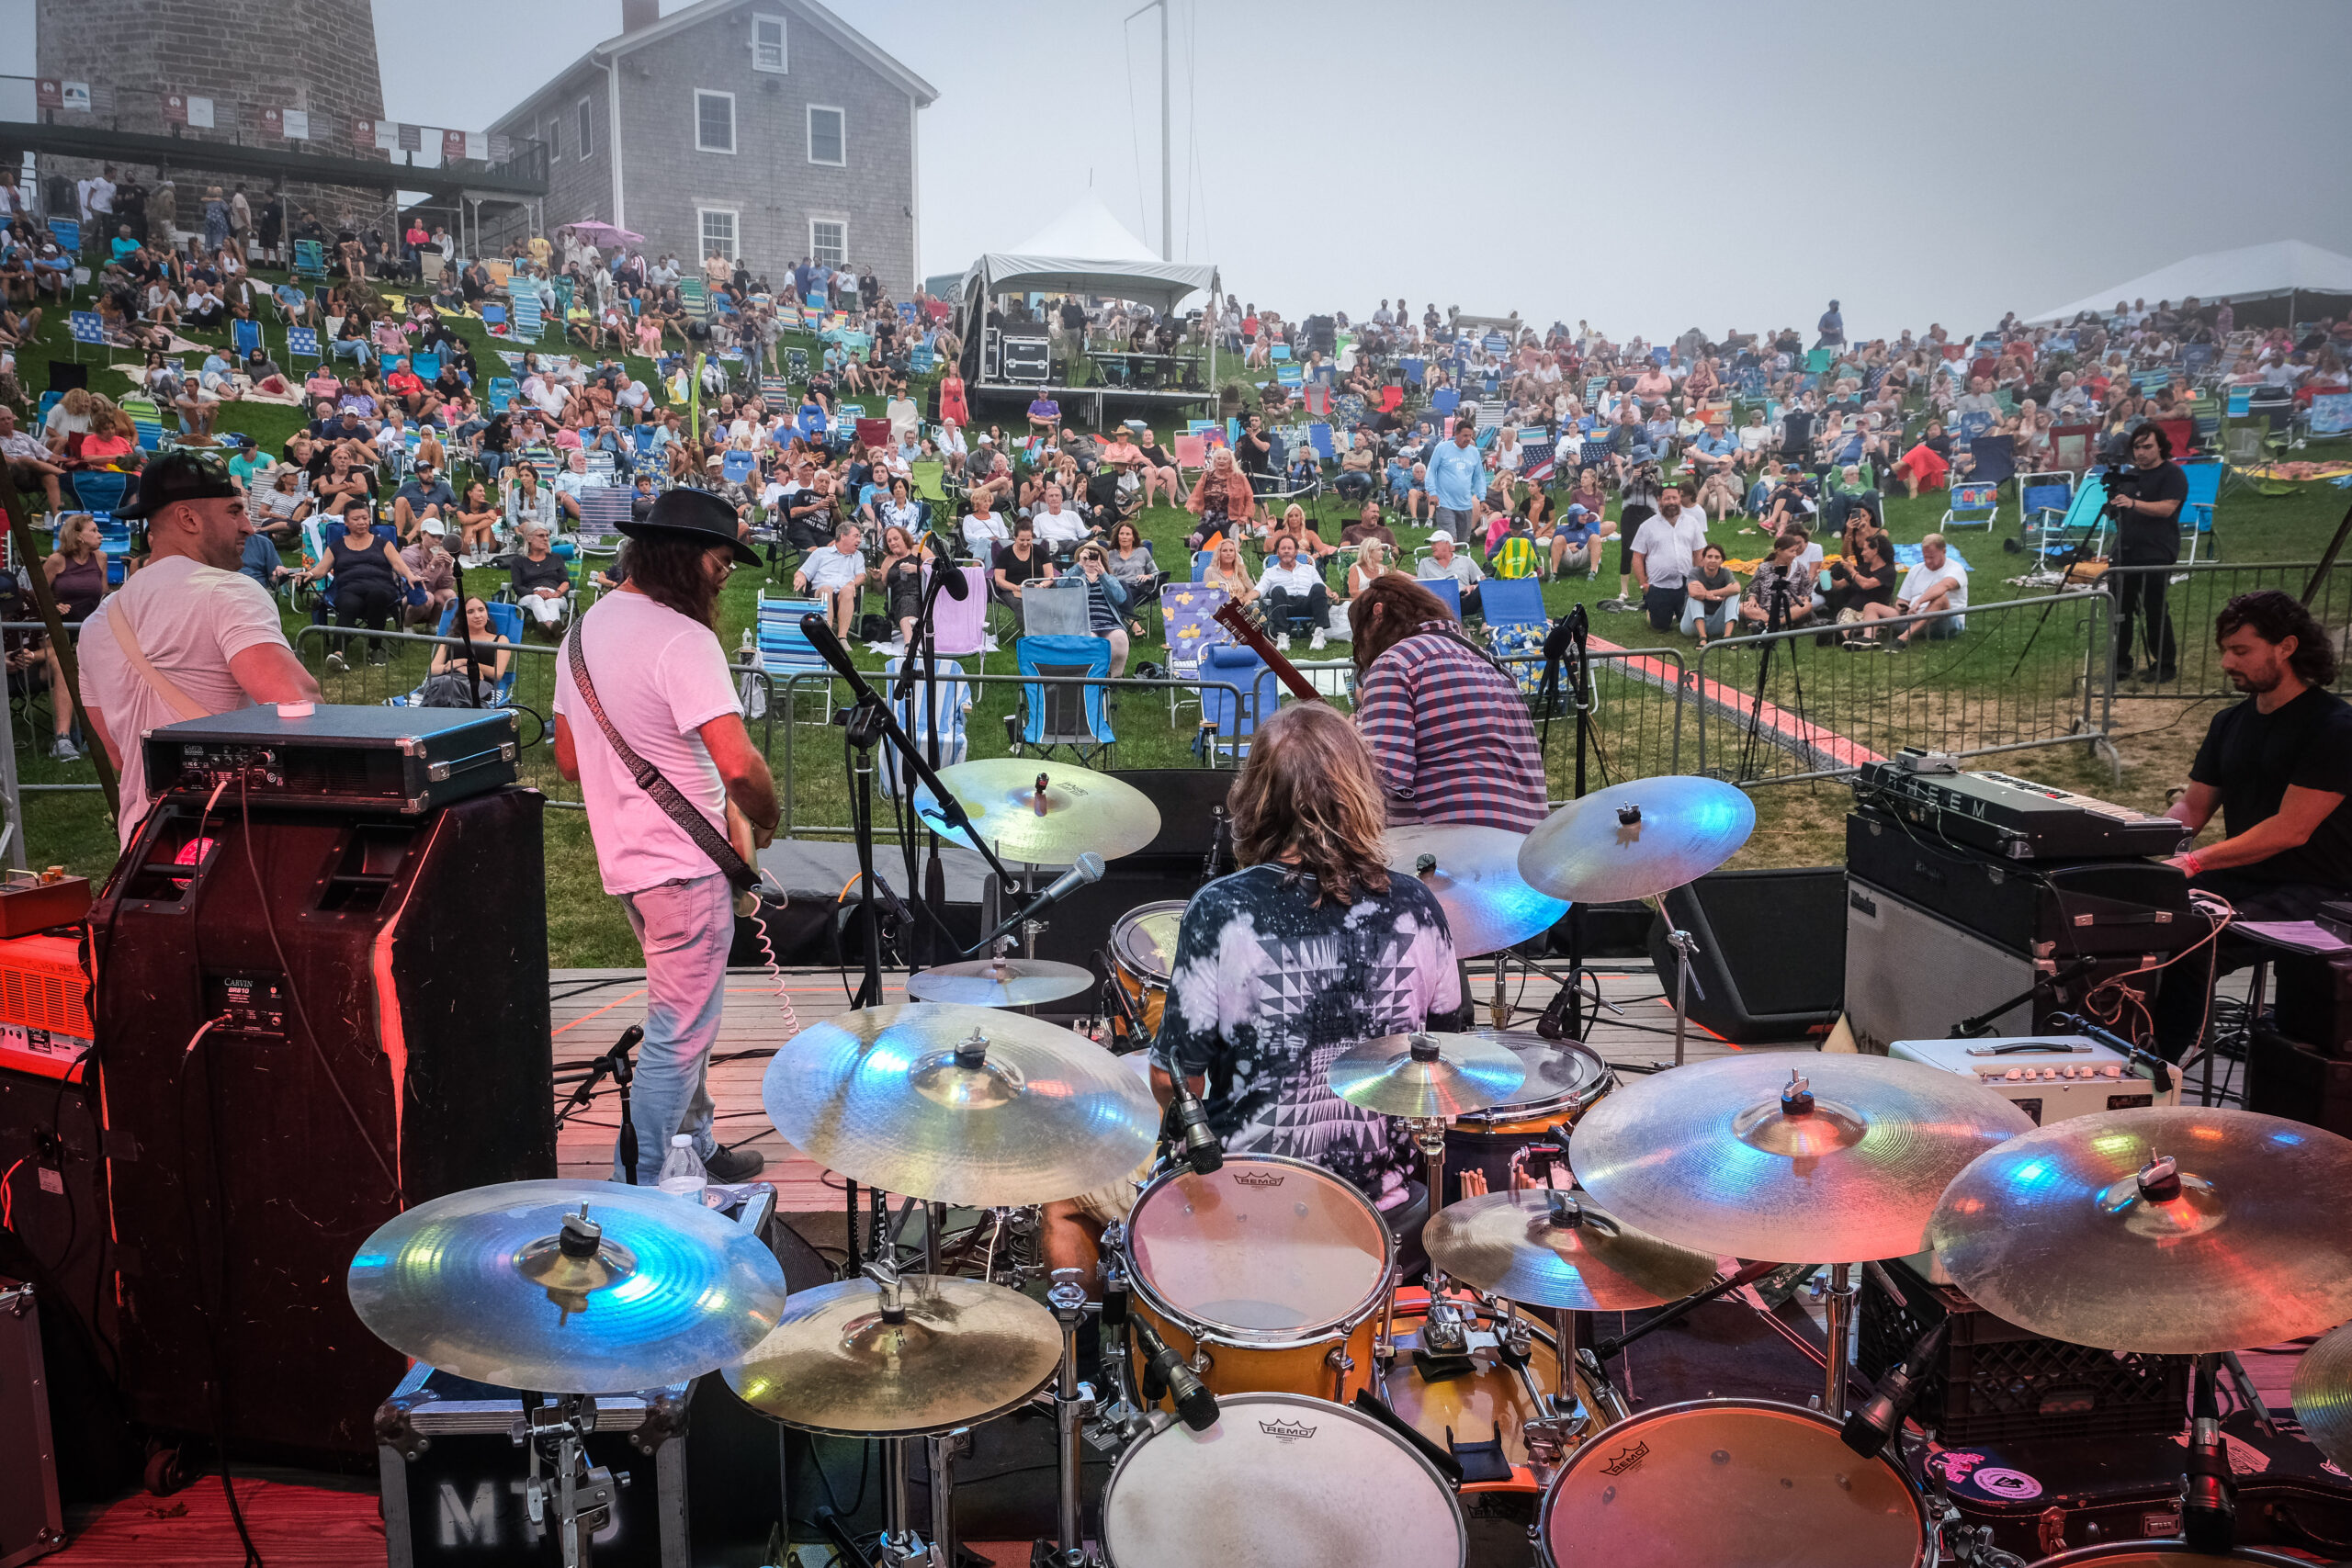 The Montauk Project Releases New Music; Builds On Lifelong Roots On The South Fork